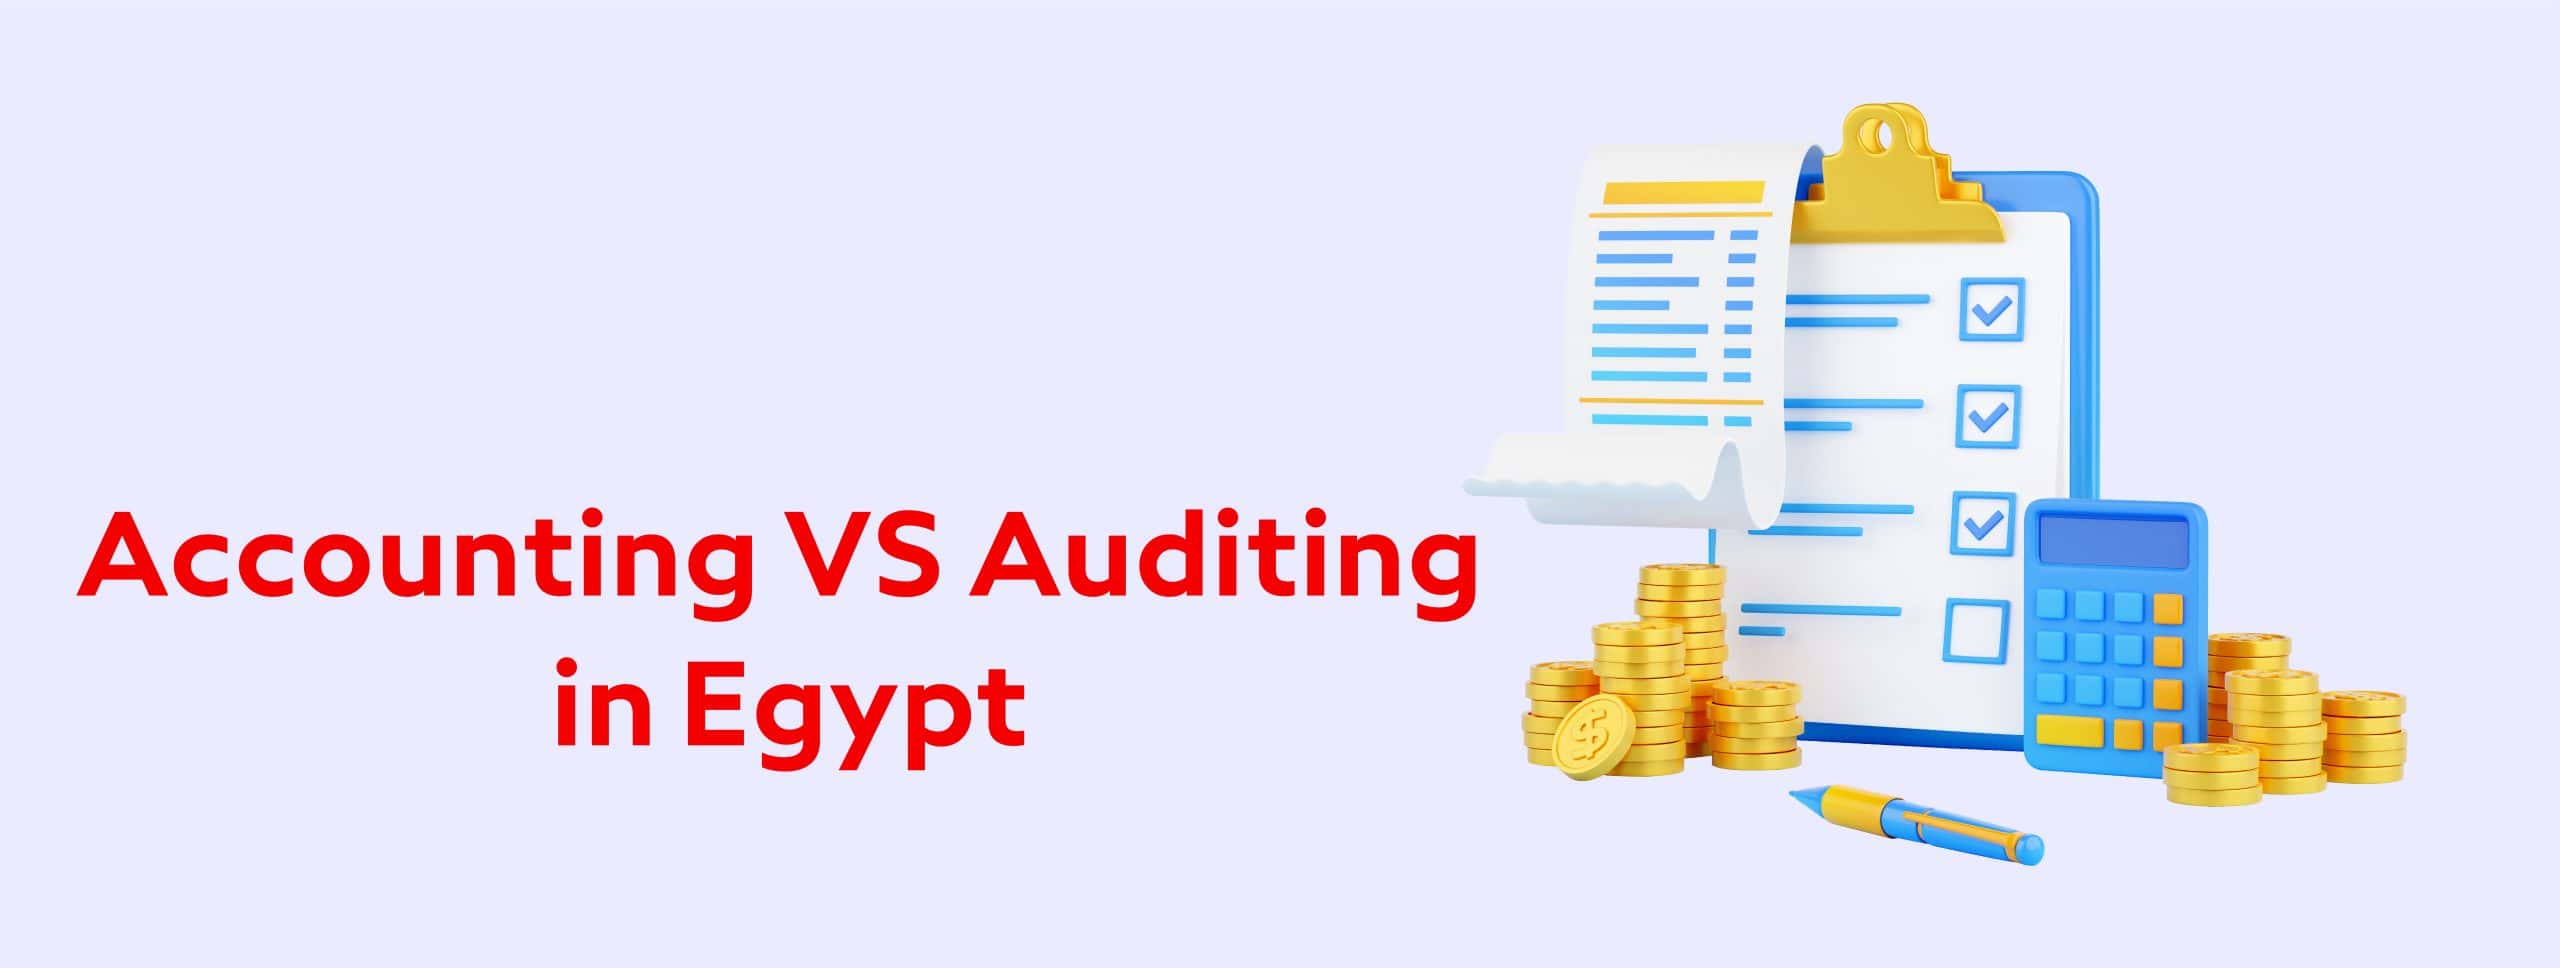 Accounting and Auditing in Egypt